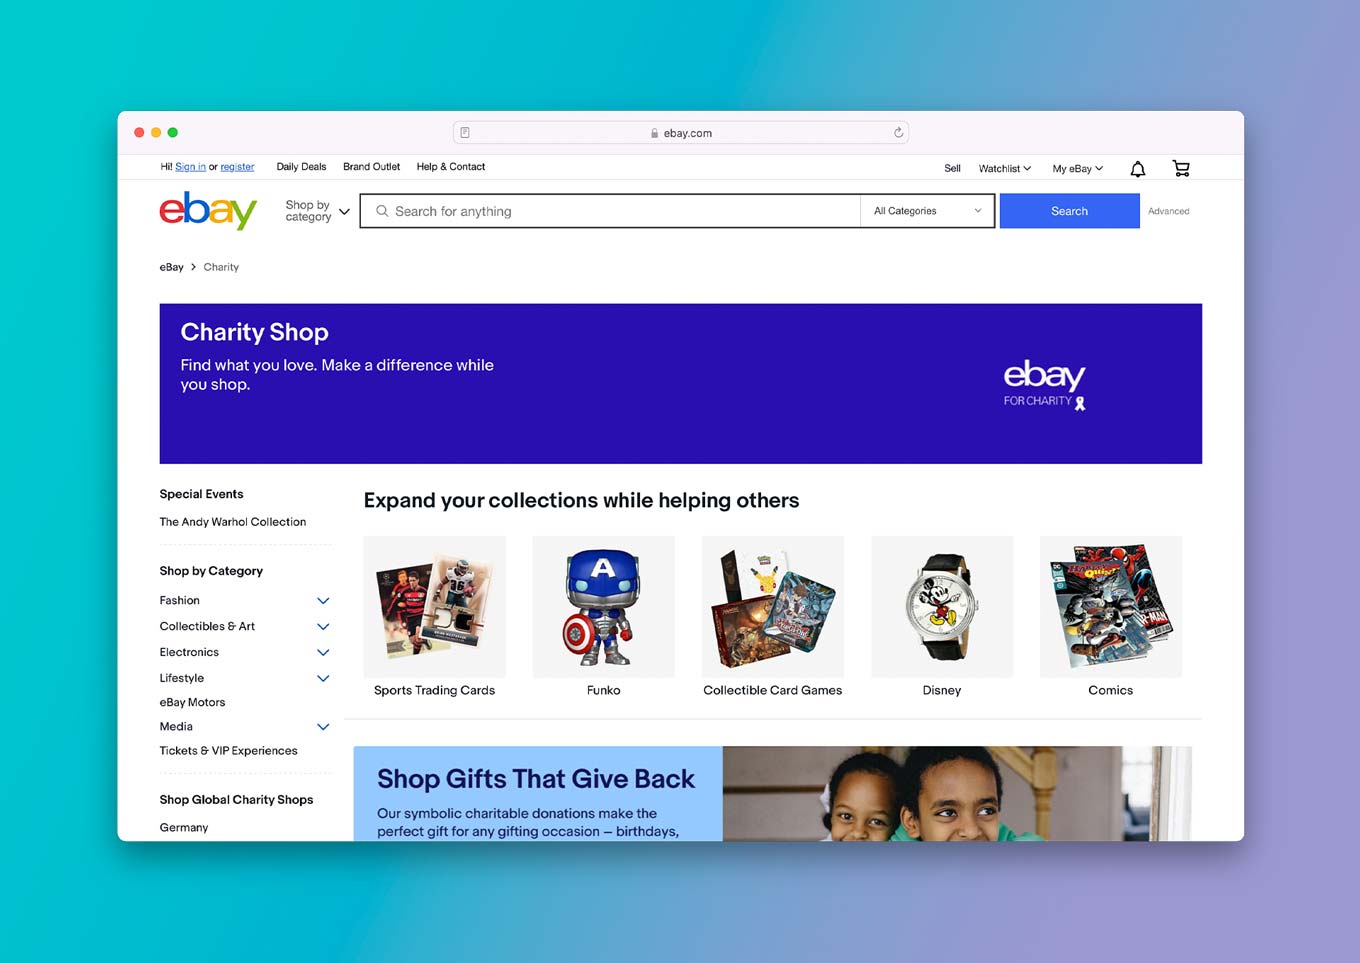 eBay for Charity Website: "Charity Shop - Find what you love. Make a difference while you shop."